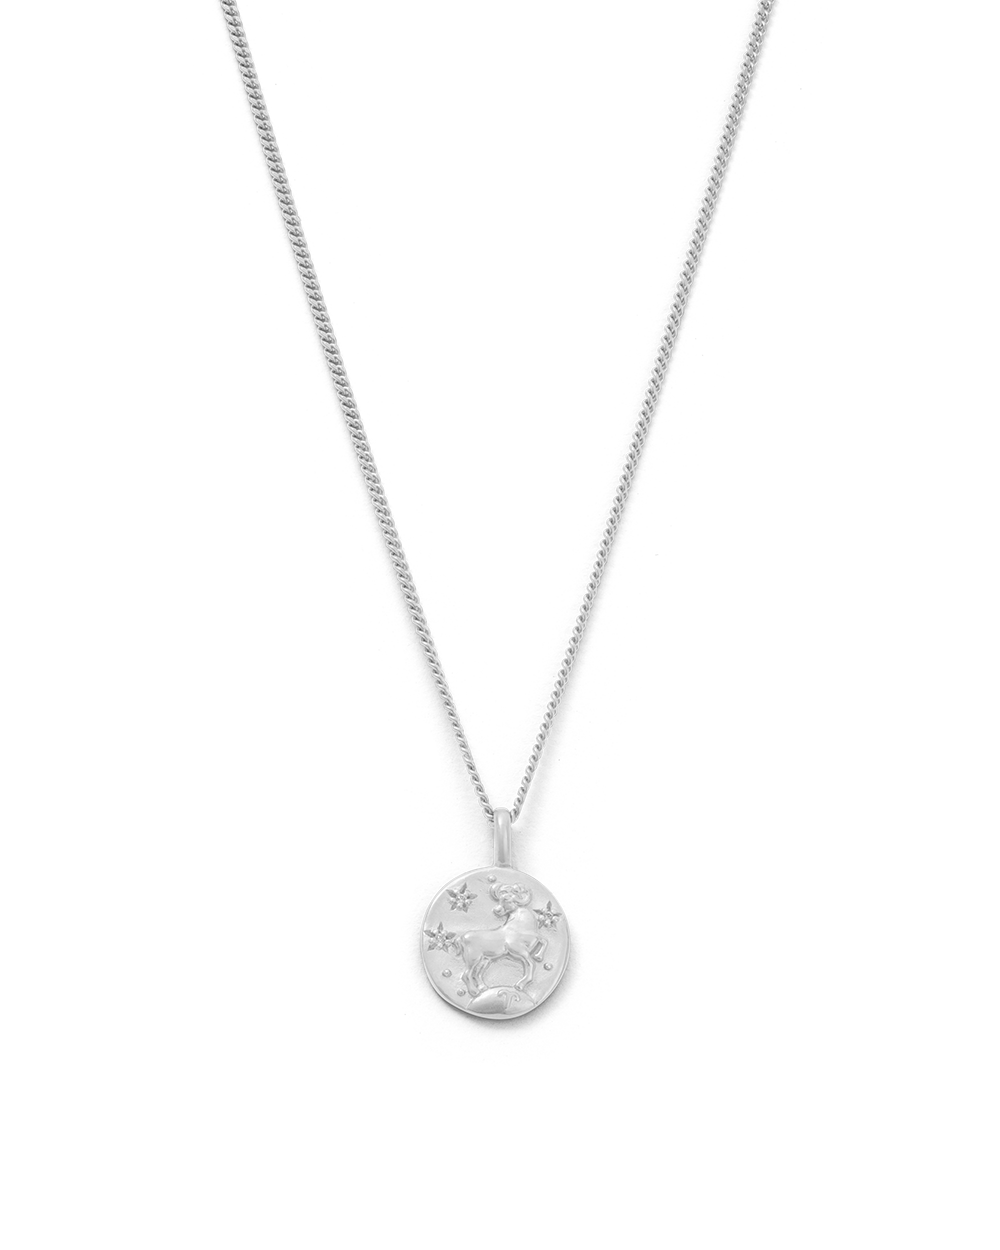 ARIES PETITE ZODIAC NECKLACE (STERLING SILVER)